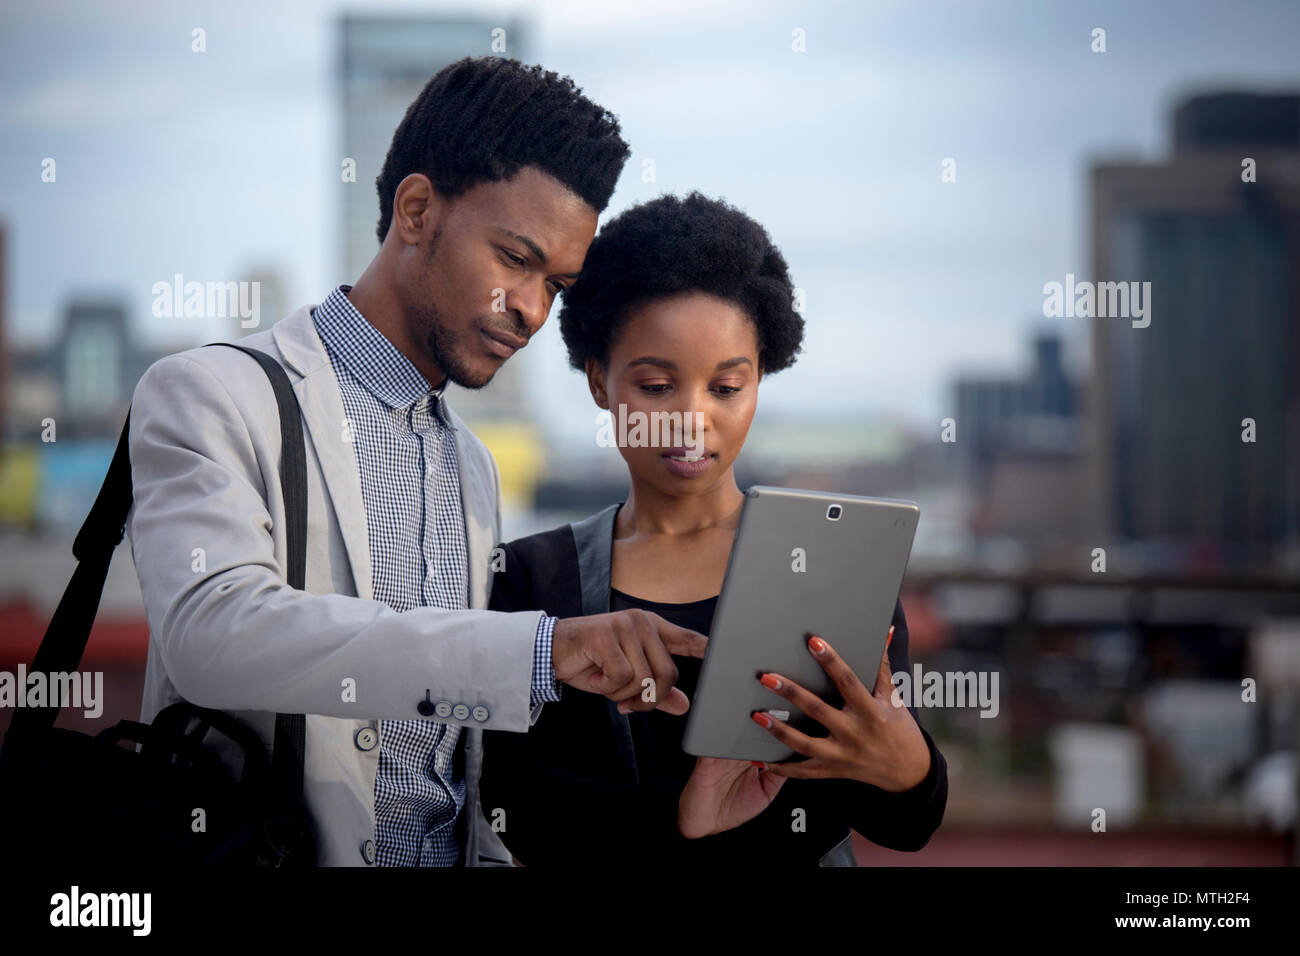 business man and woman looking at tablet Stock Photo